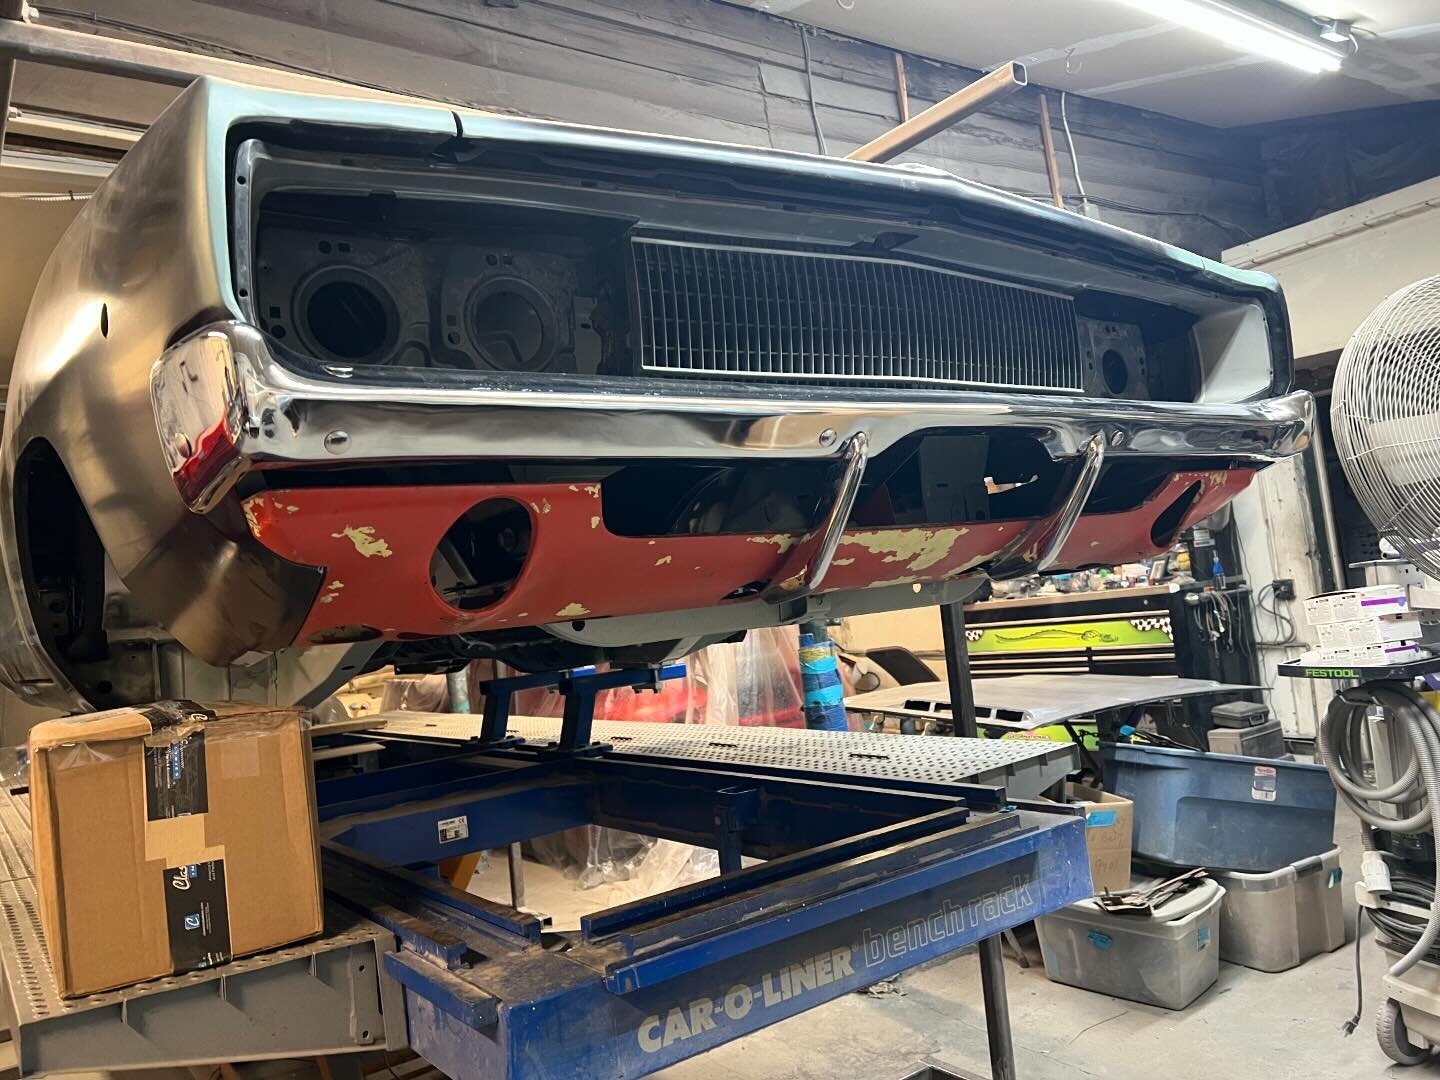 1968 Dodge Charger RT front bumper fits in alignment of front sheetmetal and grill#longvalleyautobody #1968dodgechargerrt